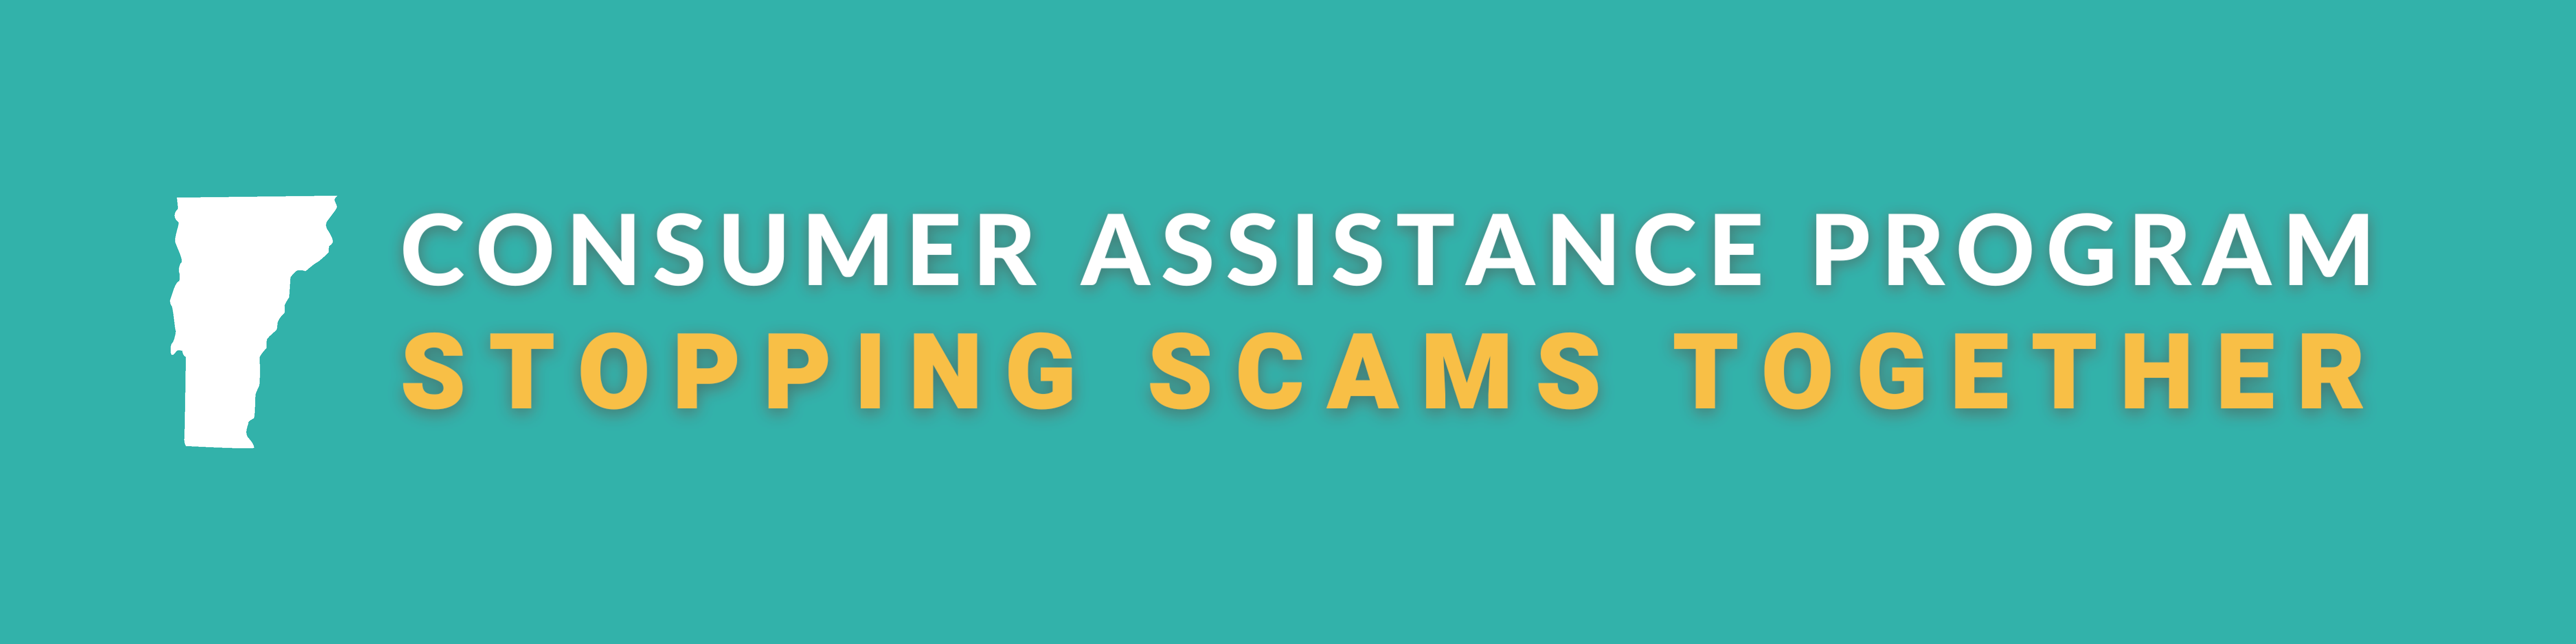 Consumer Assistance Program - Stopping Scams Together